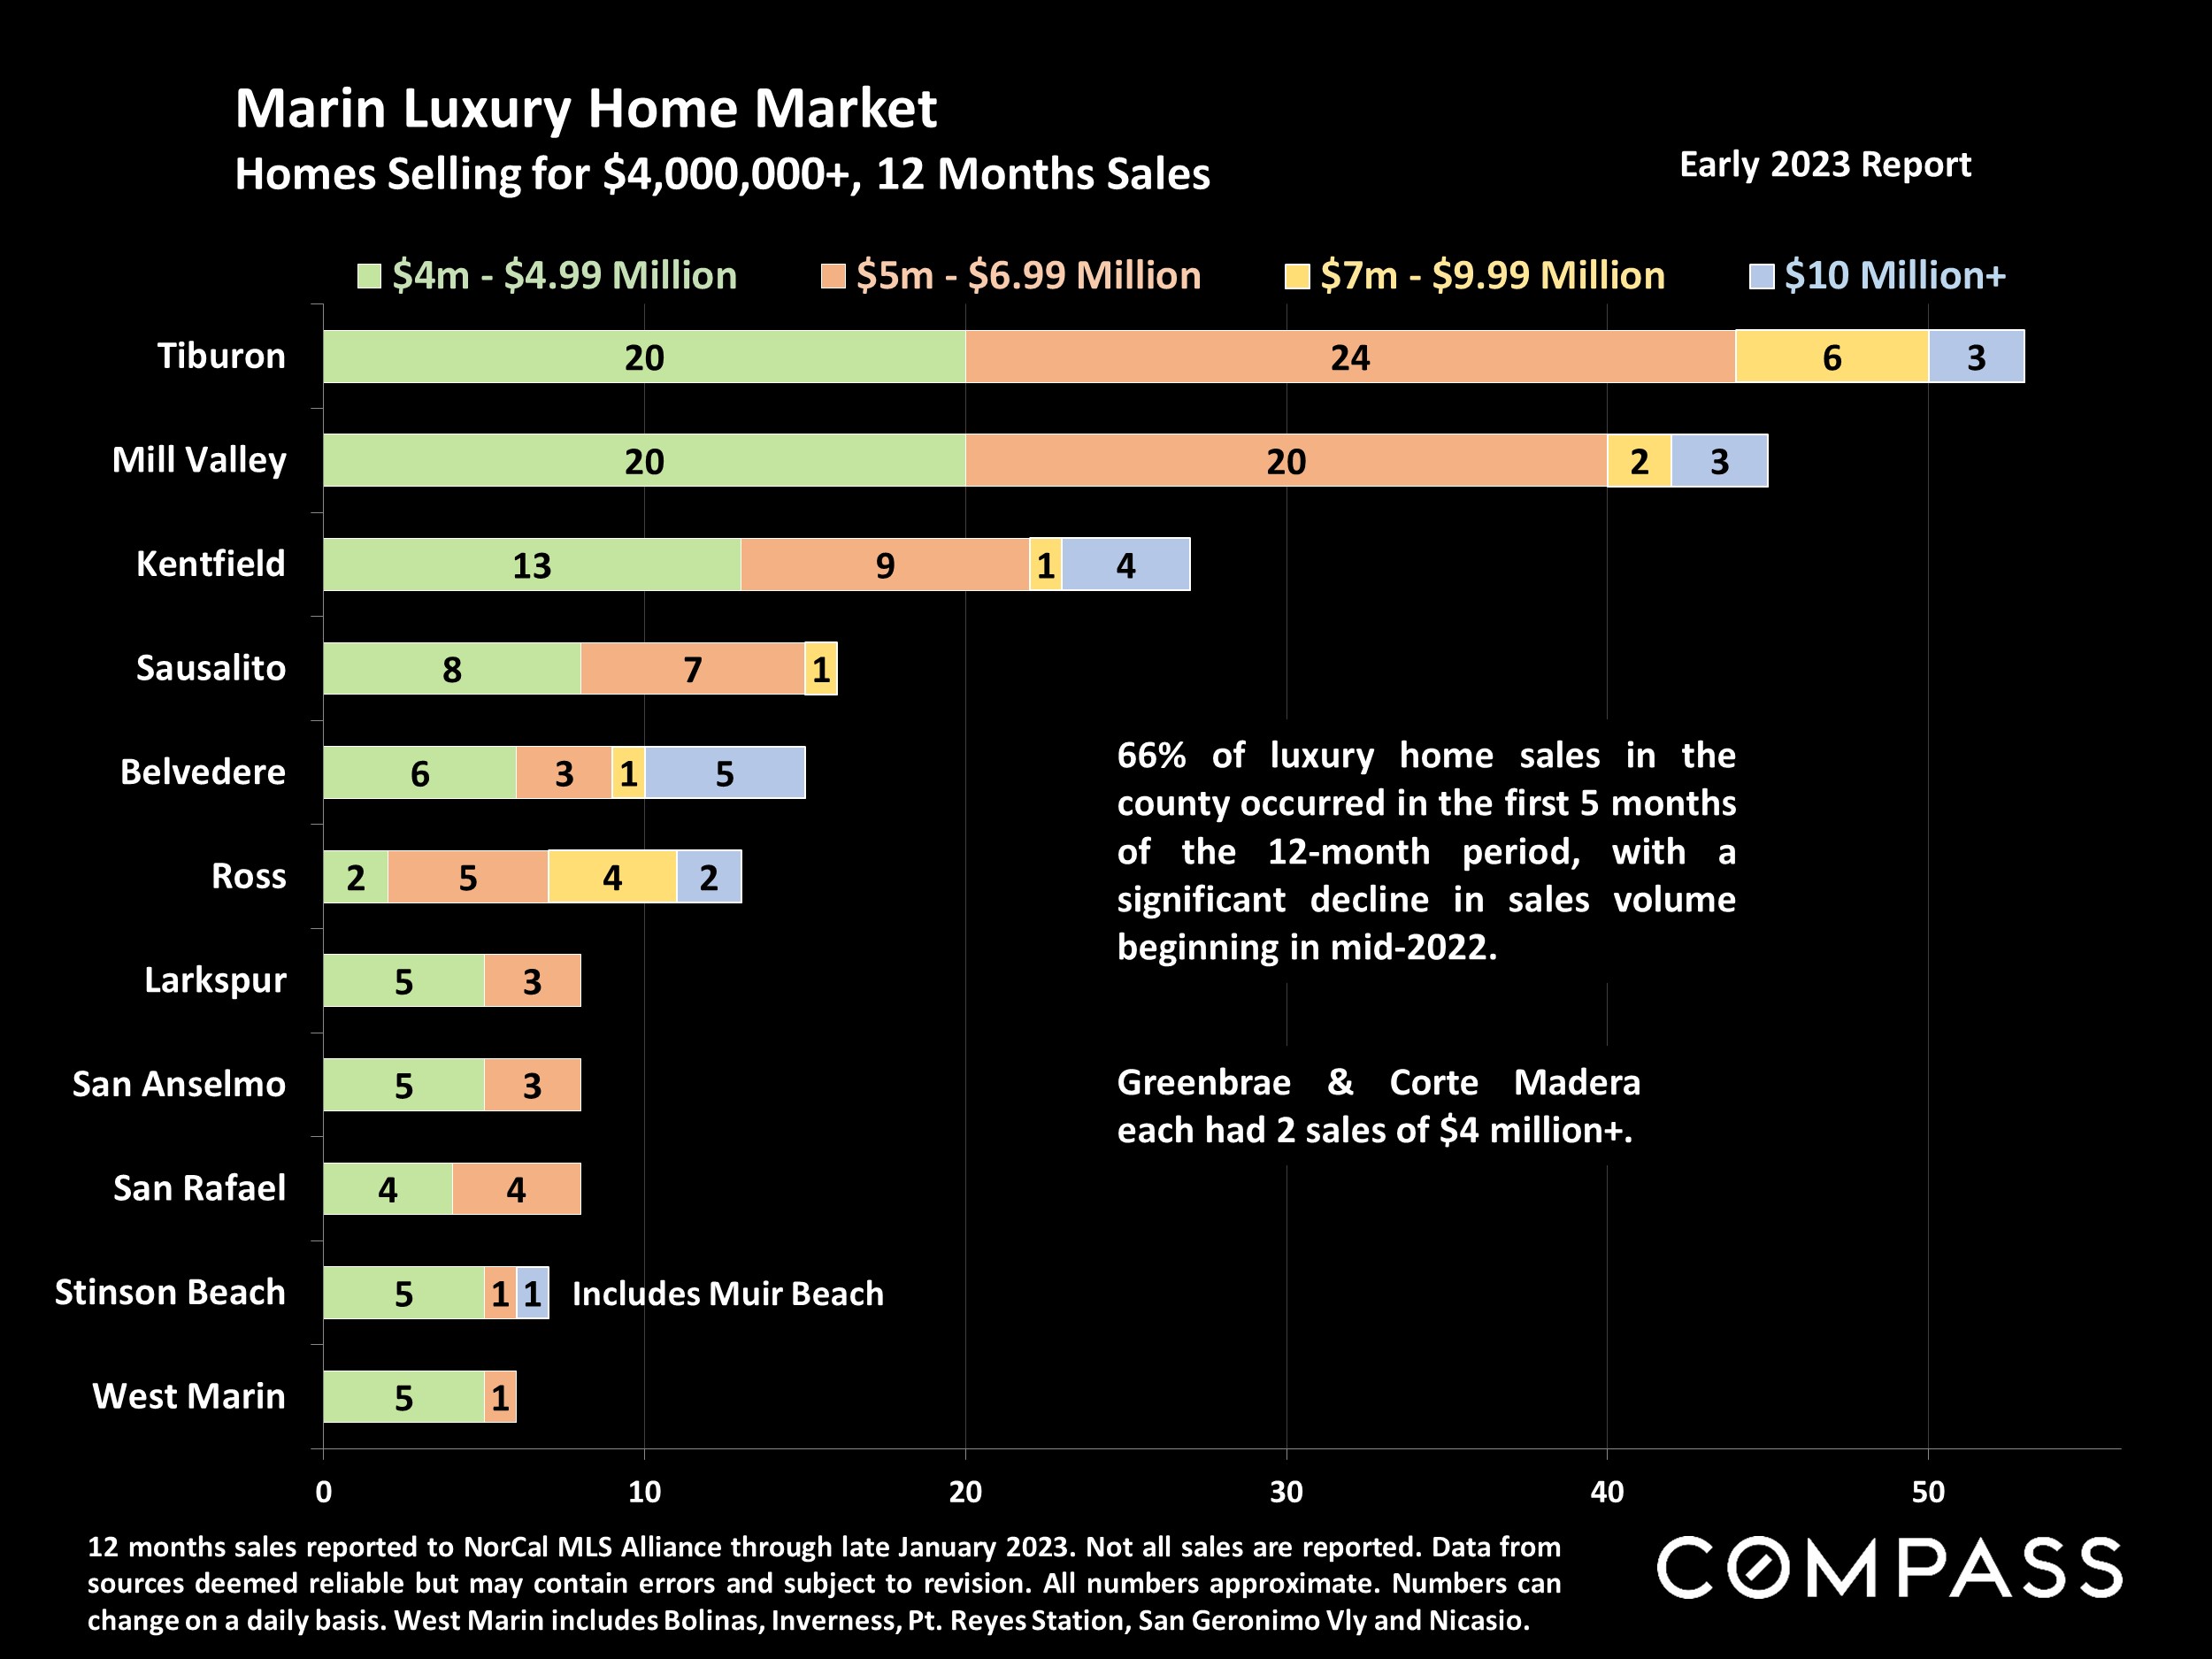 Marin Luxury Home Market Homes Selling for $4,000,000+, 12 Months Sales